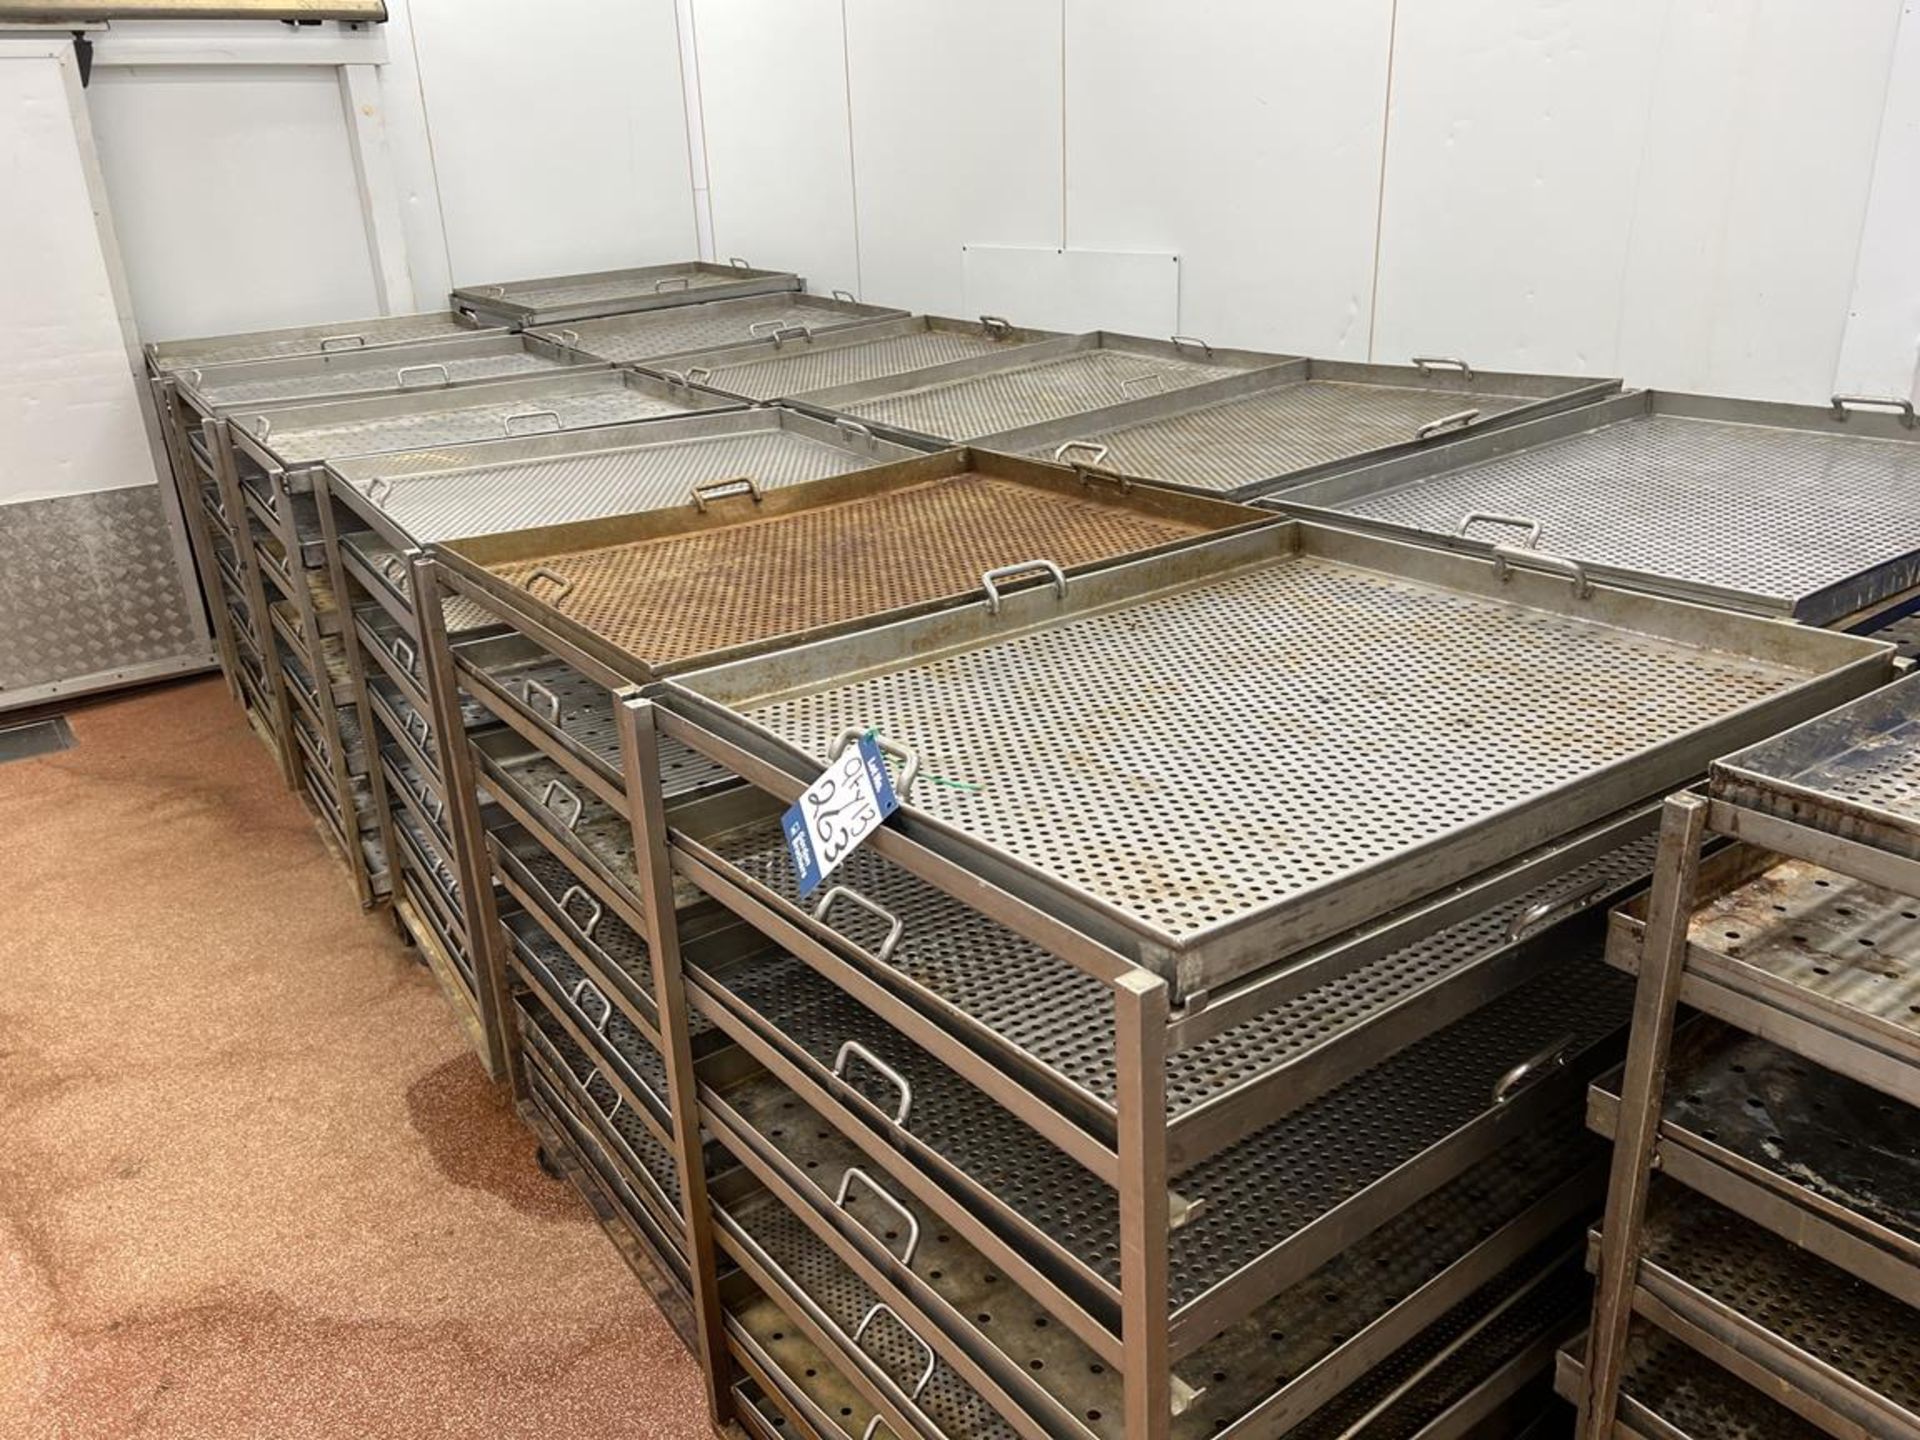 13x (no.) Six/Seven-tier stainless steel product racks on wheels, size of removable trays 1030mm (L) - Image 2 of 4